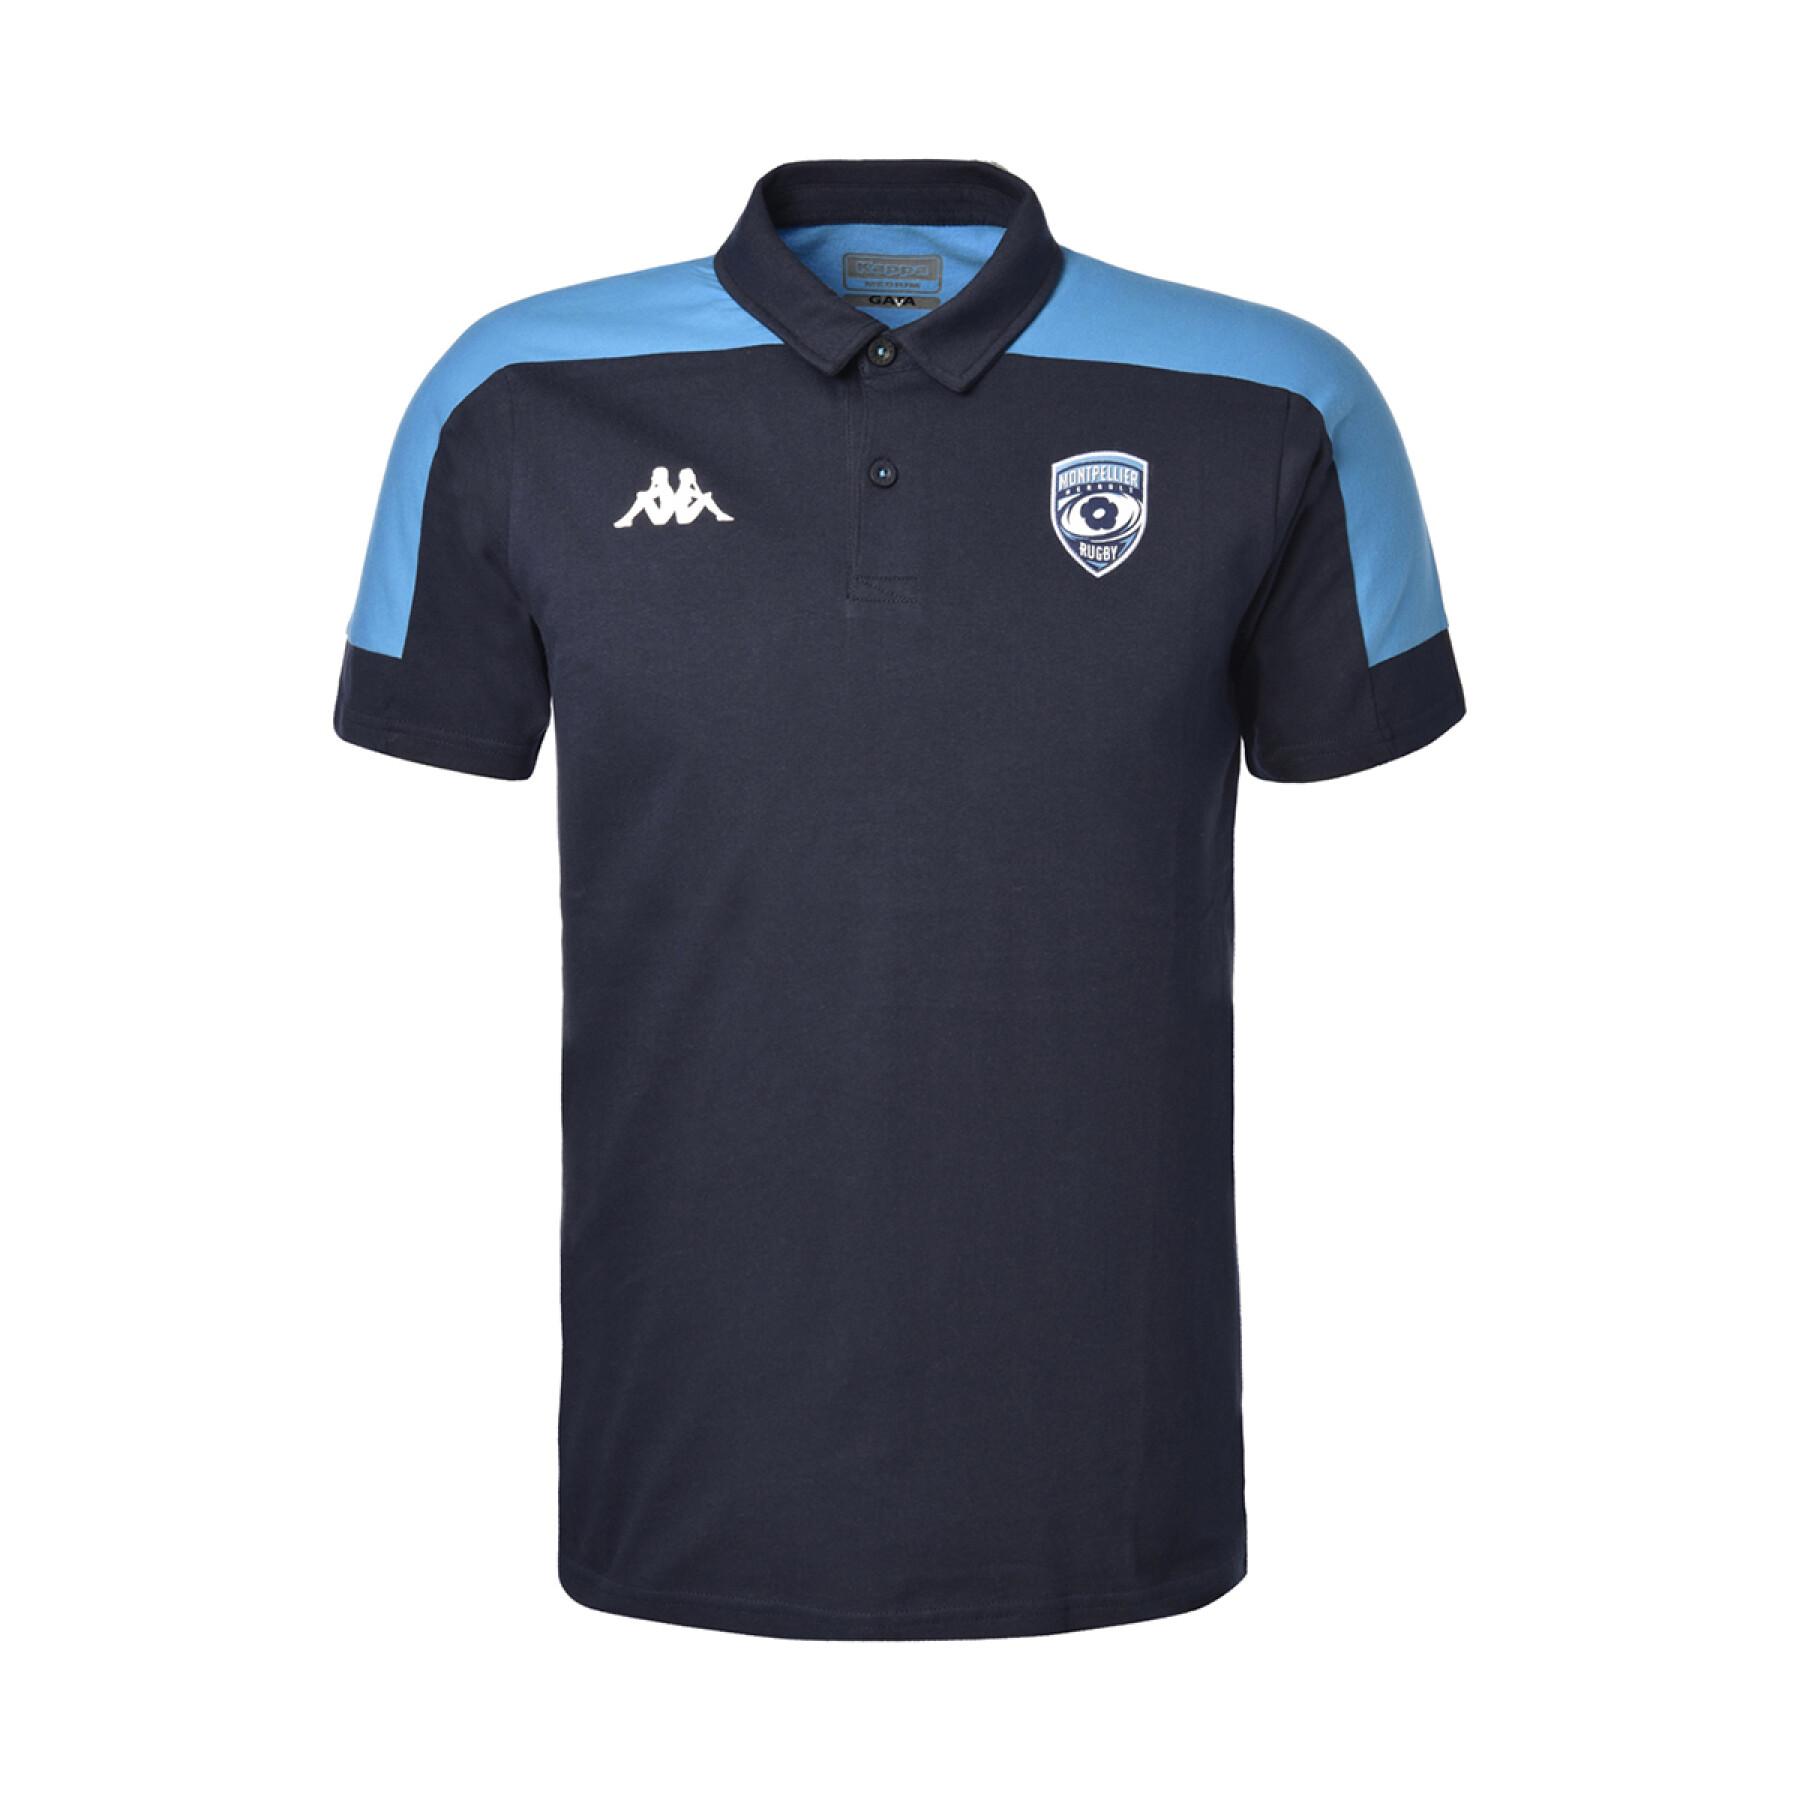 Polo Montpellier Hérault Rugby 2020/21 balla